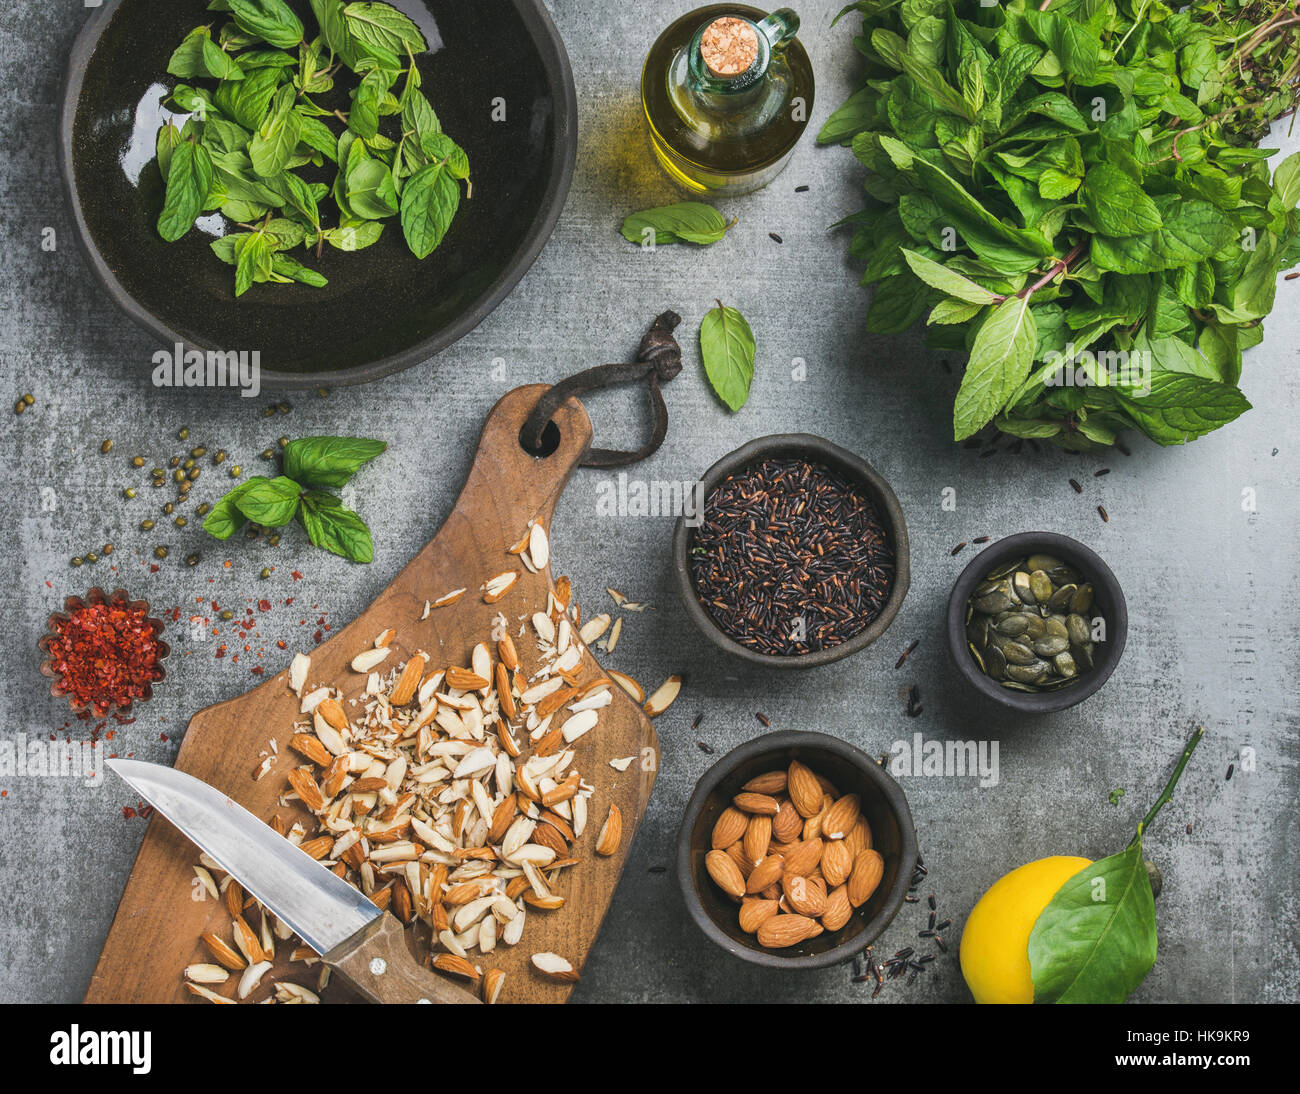 Healthy, vegetarian, vegan or clean eating cooking ingredients. Chopped almonds, fresh mint, oil, black rice, pumpkin seeds spices, lemon over grey co Stock Photo